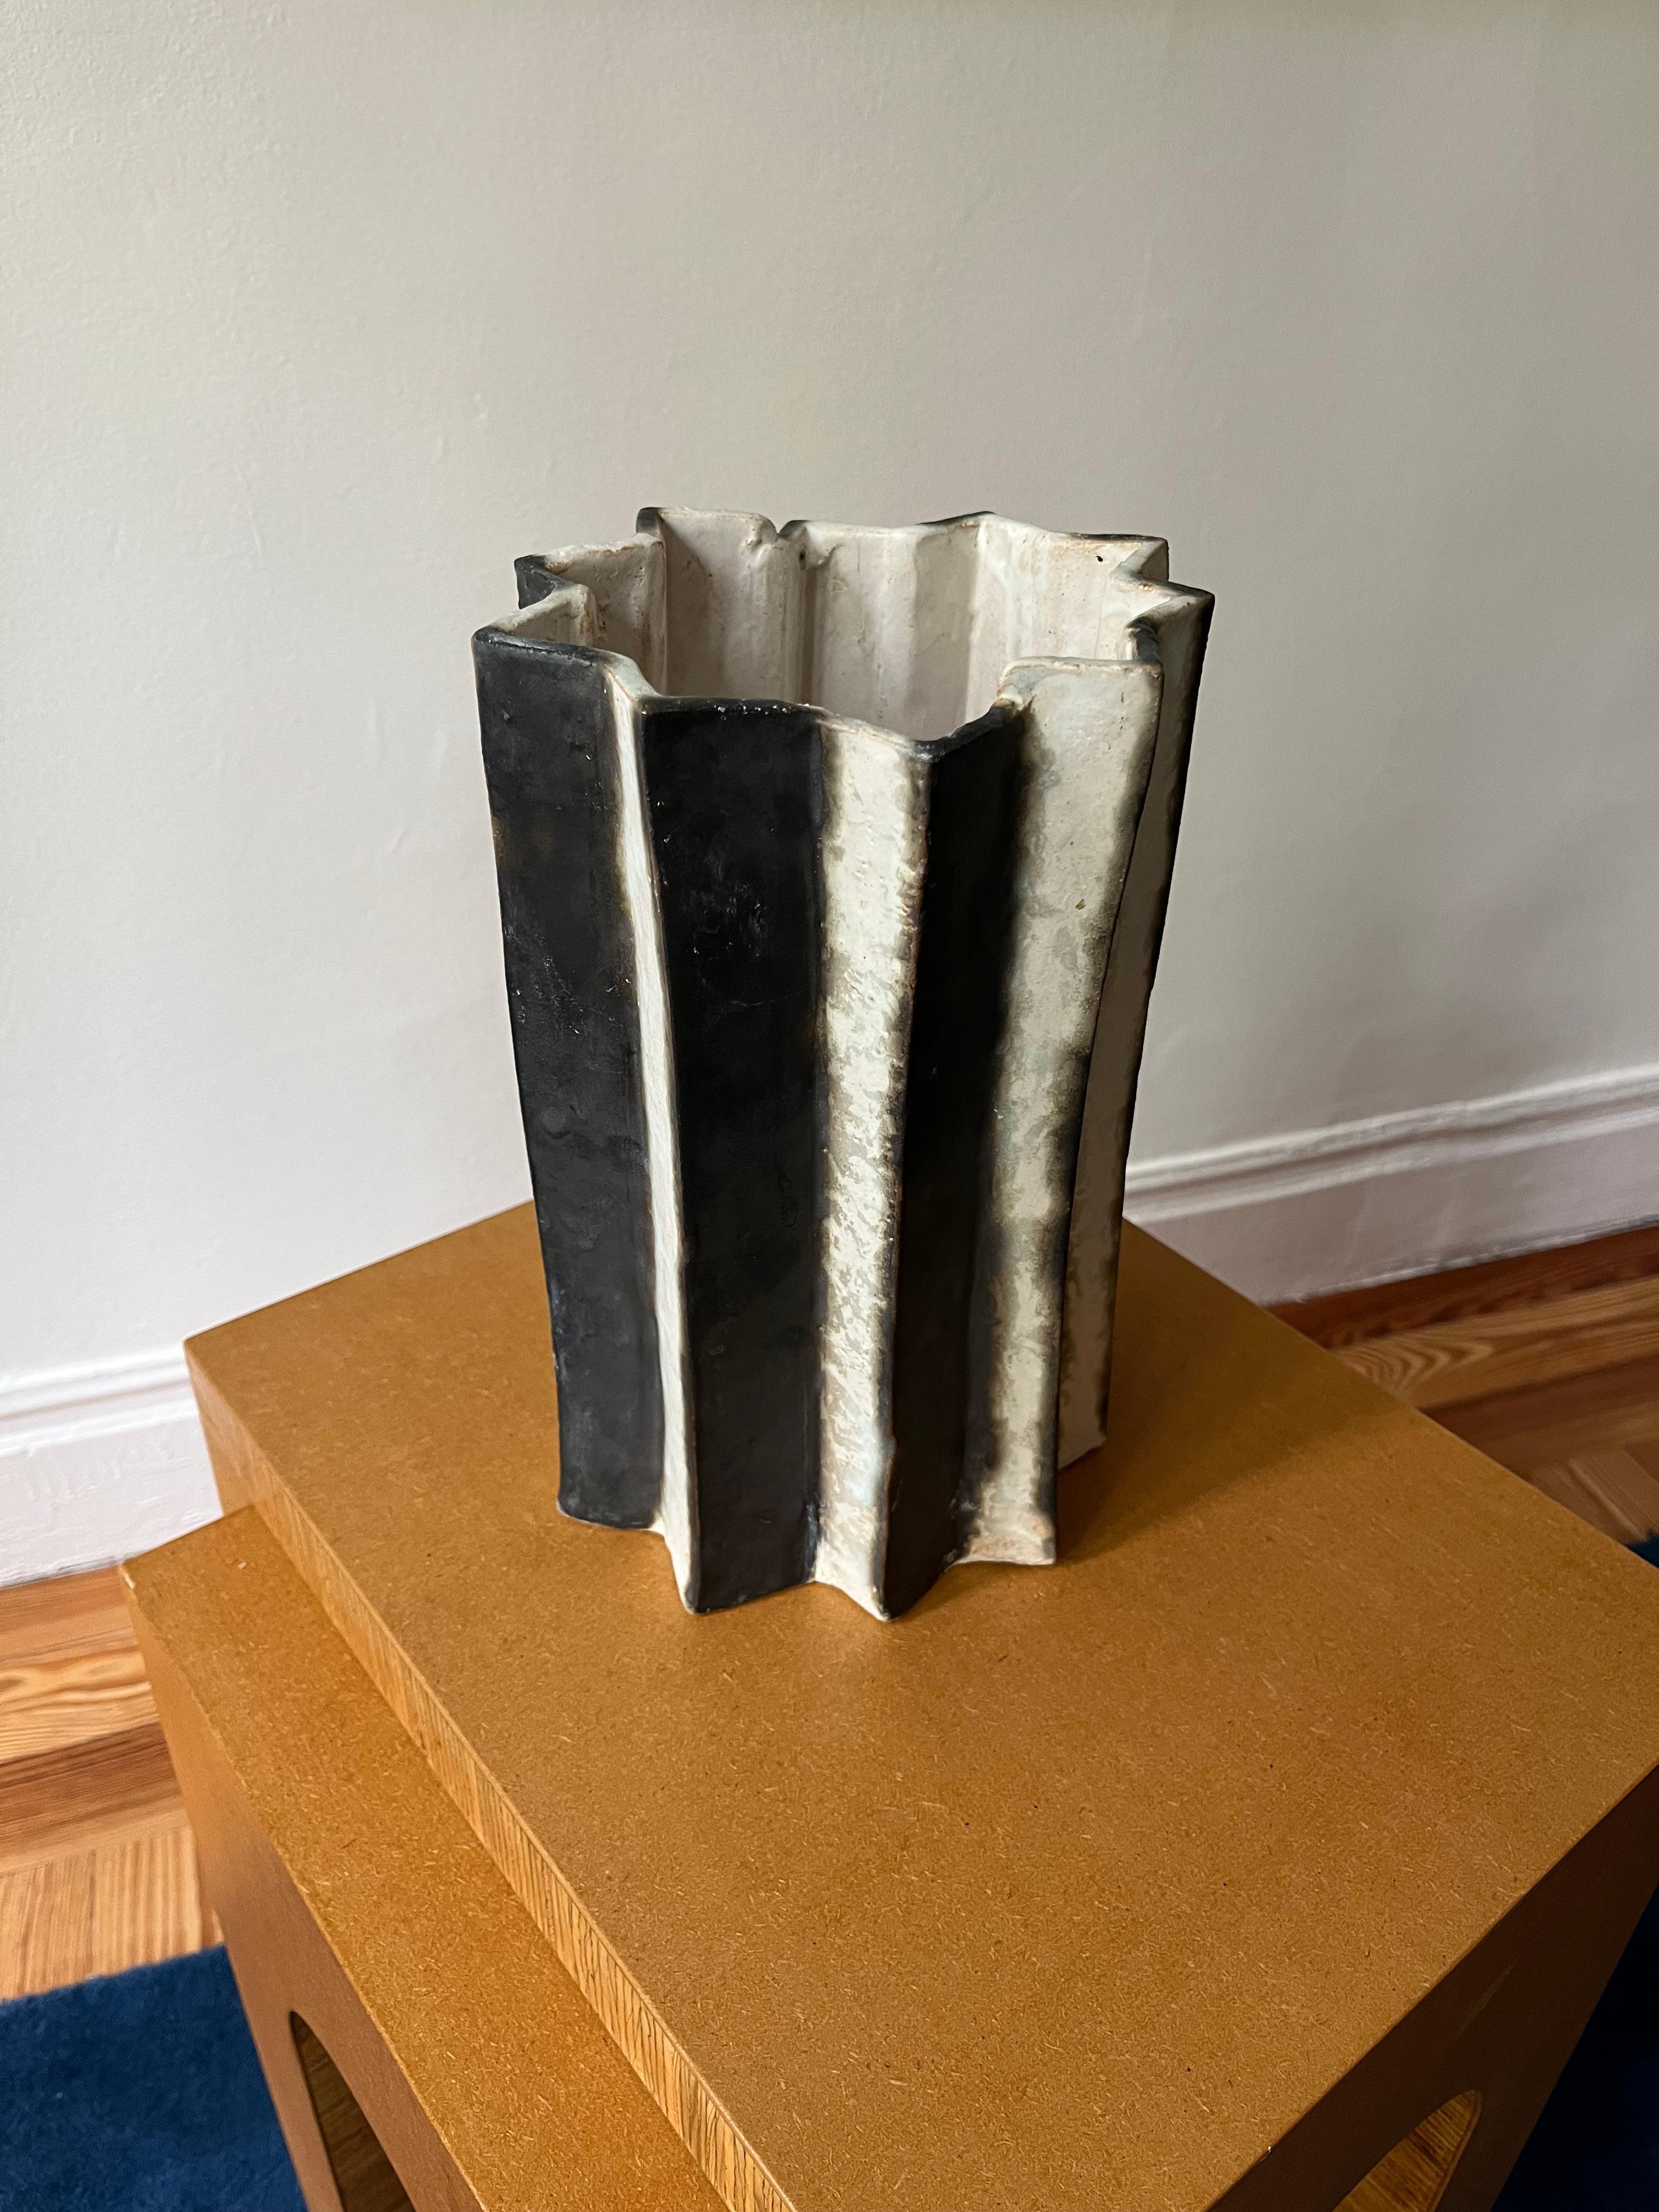 Black and white folded vase by Jordan Mcdonald. Interior shows signs of use but still fully functional as a vase and shows not signs of use on the exterior of the vase. 

About the artist:

JORDAN MCDONALD IS A PHILADELPHIA BASED CERAMIC ARTIST